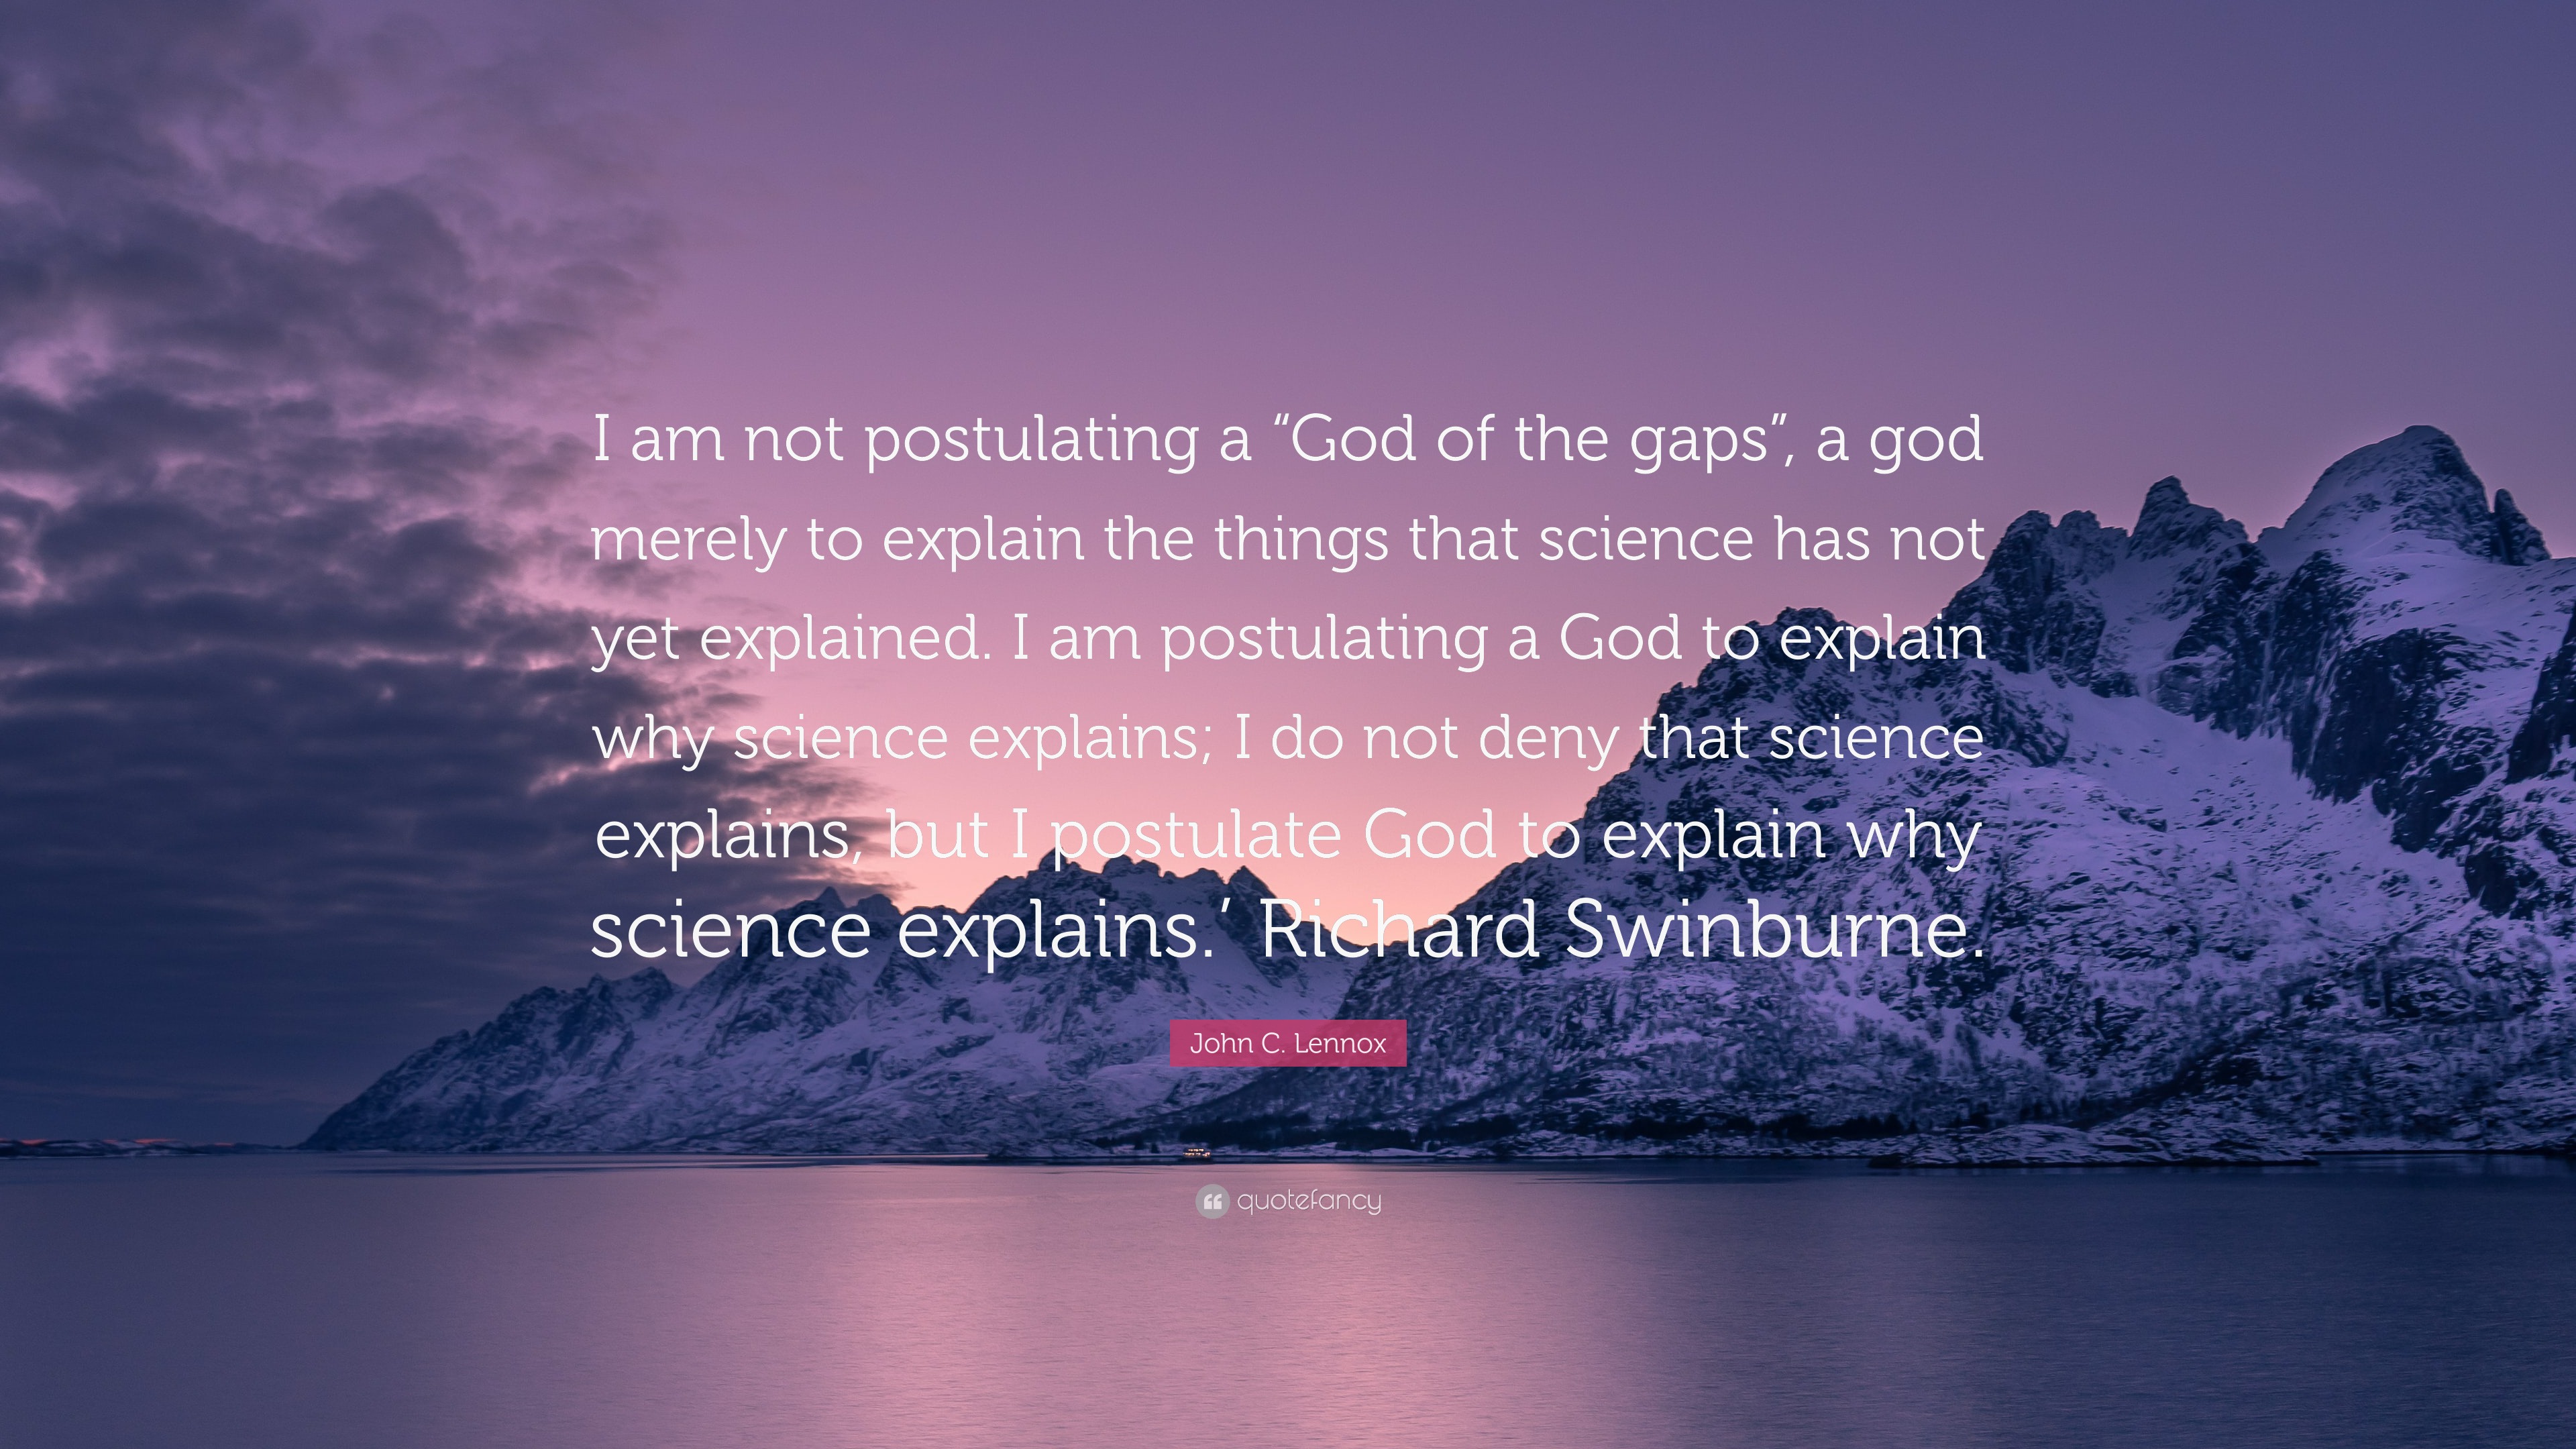 John C Lennox Quote “i Am Not Postulating A “god Of The Gaps” A God Merely To Explain The 9854